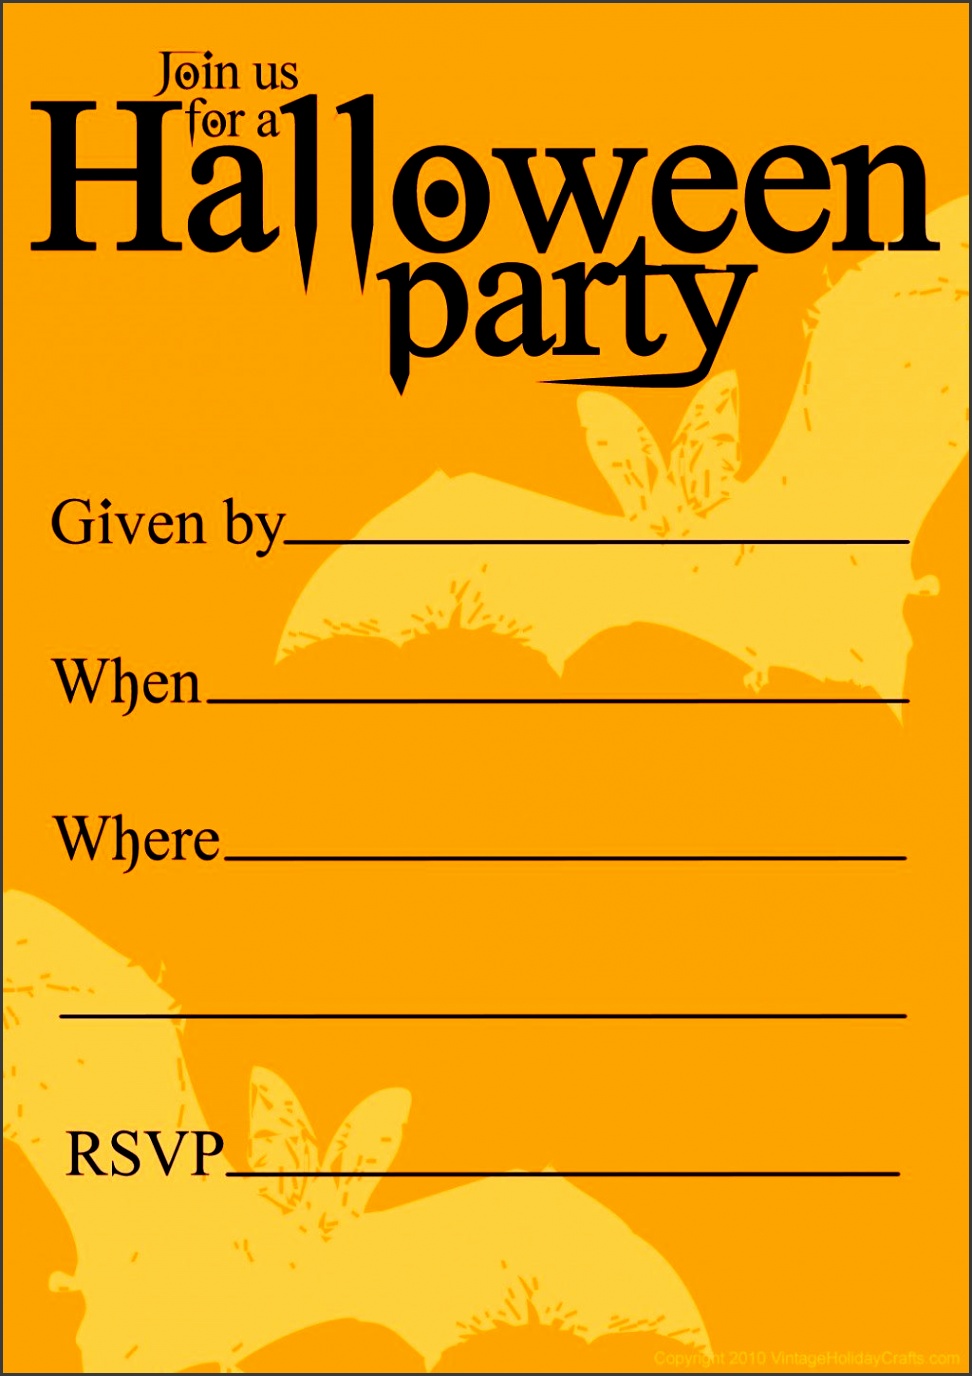 download-free-printable-halloween-invitation-template-it-s-scary-yet